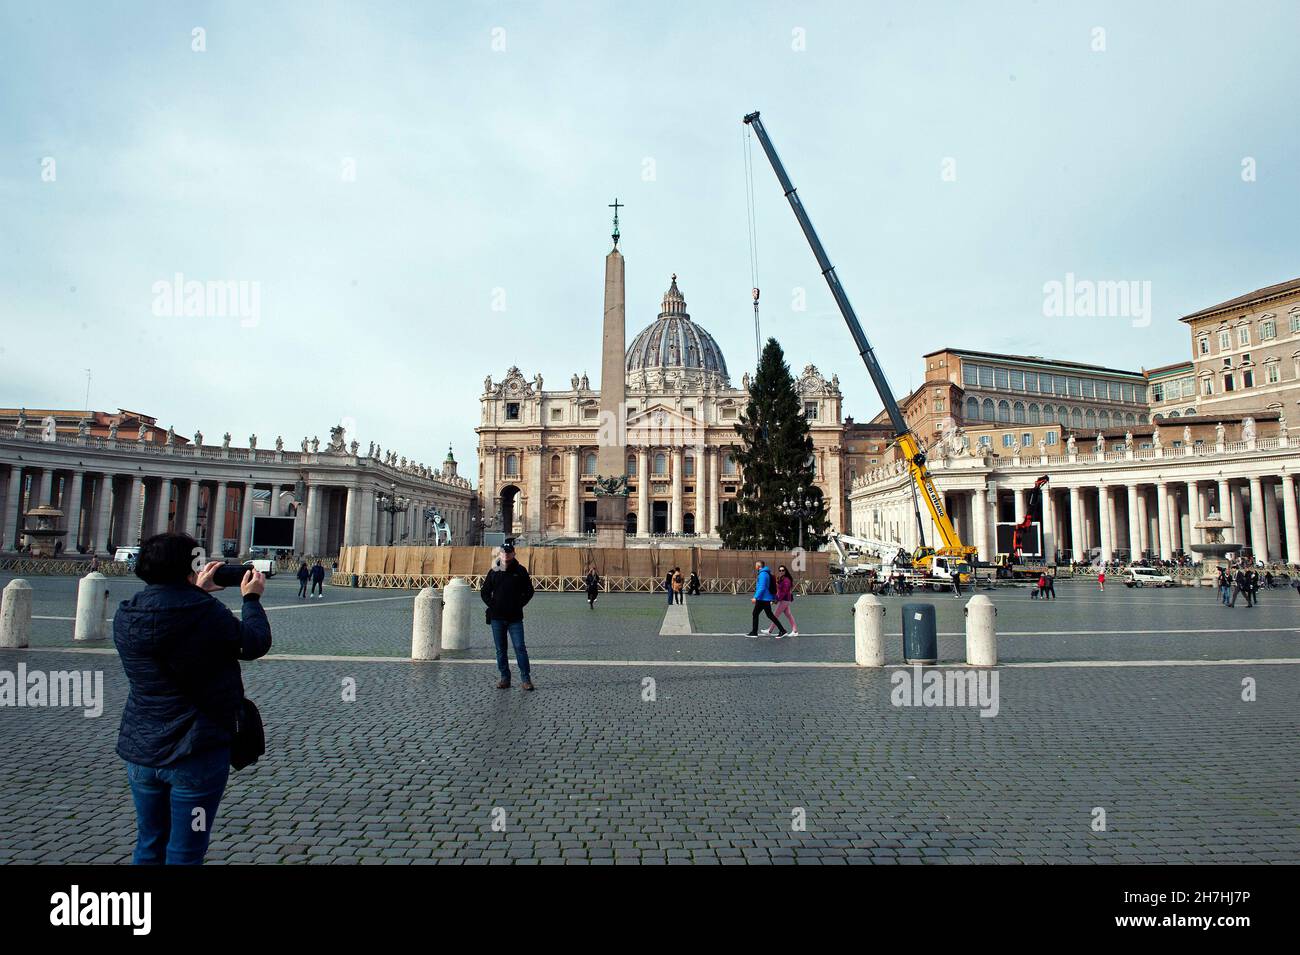 Italy, Rome, Vatican, 2021/11/23  A crane lifts a Christmas Tree, a spruce of 28 meters, that was taken from the forests of Andalo in the Trentino region, during its installation at St. Peter's Square in the Vatican.  . Photograph by Alessia Giuliani / Catholic Press Photo. RESTRICTED TO EDITORIAL USE - NO MARKETING - NO ADVERTISING CAMPAIGNS. Stock Photo